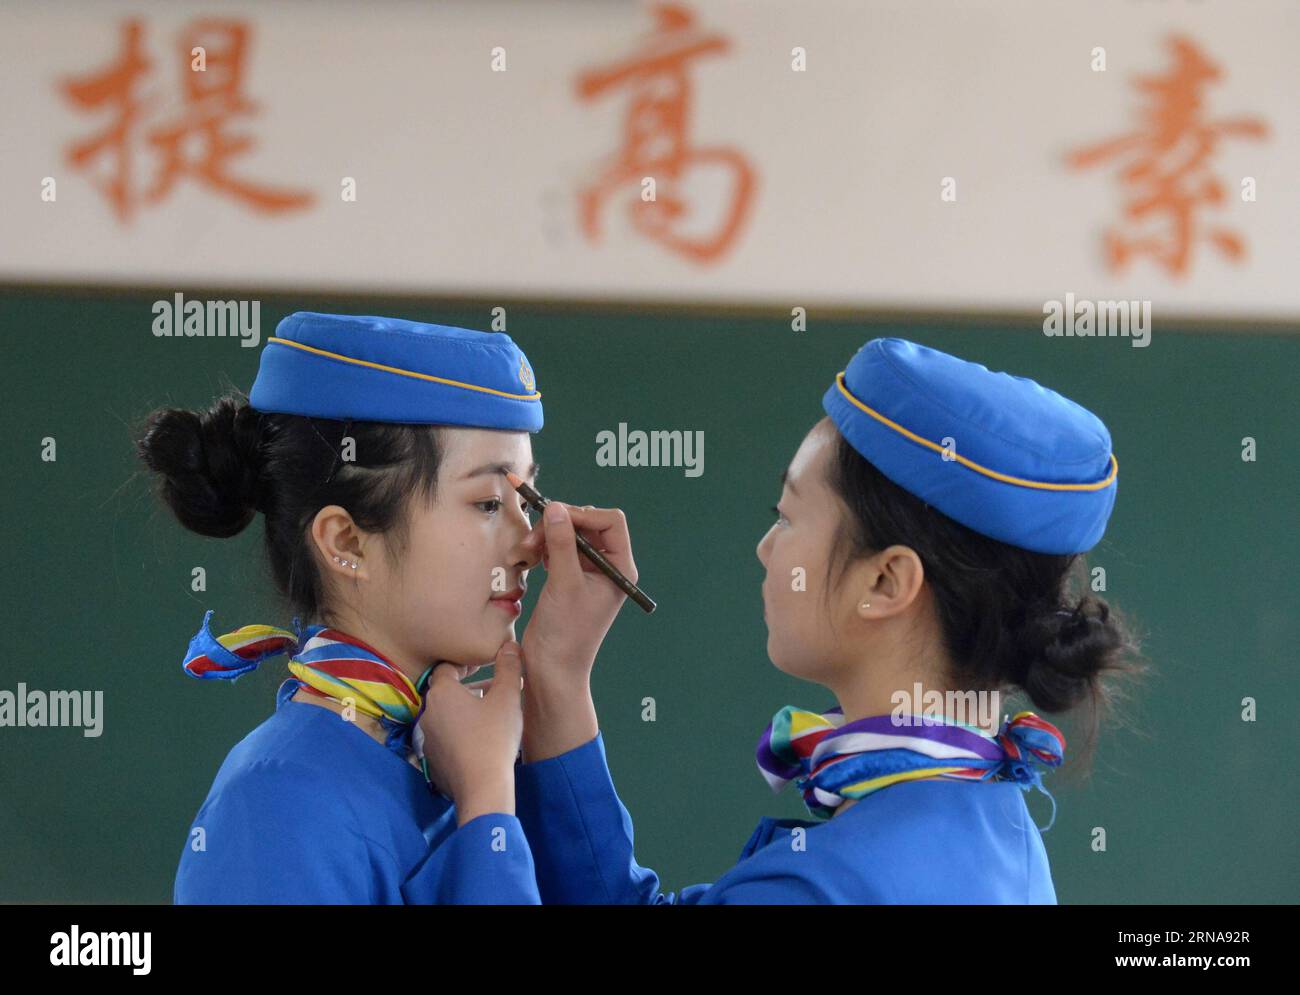 Flugbegleiter-Schule in China CHONGQING, Jan. 13, 2016 -- A student pencils the eyebrows for her classmate in training class at Bishan Vocational Education Center in Chongqing, southwest China, Jan. 13, 2016. These students were trained to be stewardesses of the high-speed train. ) (ry) CHINA-CHONGQING-STEWARDESS TRAINING (CN) XiexJie PUBLICATIONxNOTxINxCHN   Flight attendants School in China Chongqing Jan 13 2016 a Student Pencils The Eyebrows for her classmate in Training Class AT Bishan Vocational Education Center in Chongqing Southwest China Jan 13 2016 Thesis Students Were trained to Be s Stock Photo